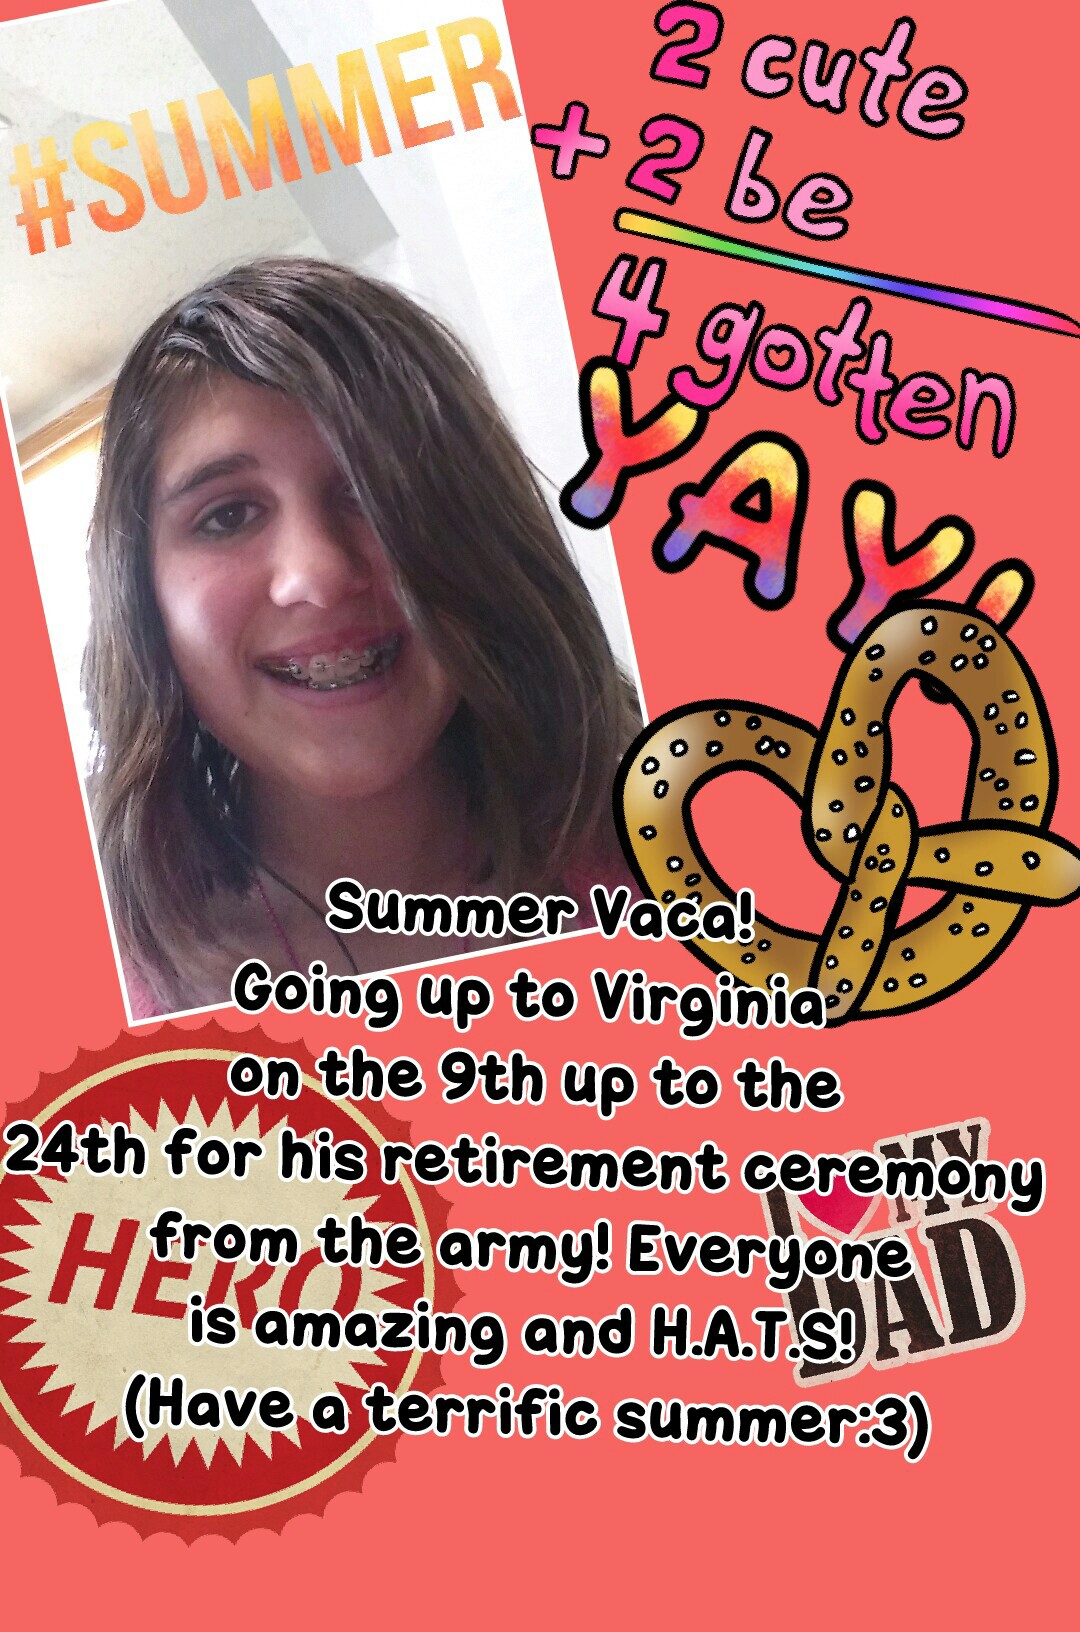 Summer Vaca!
Going up to Virginia 
on the 9th up to the
24th for his retirement ceremony 
from the army! Everyone
is amazing and H.A.T.S! 
(Have a terrific summer:3)